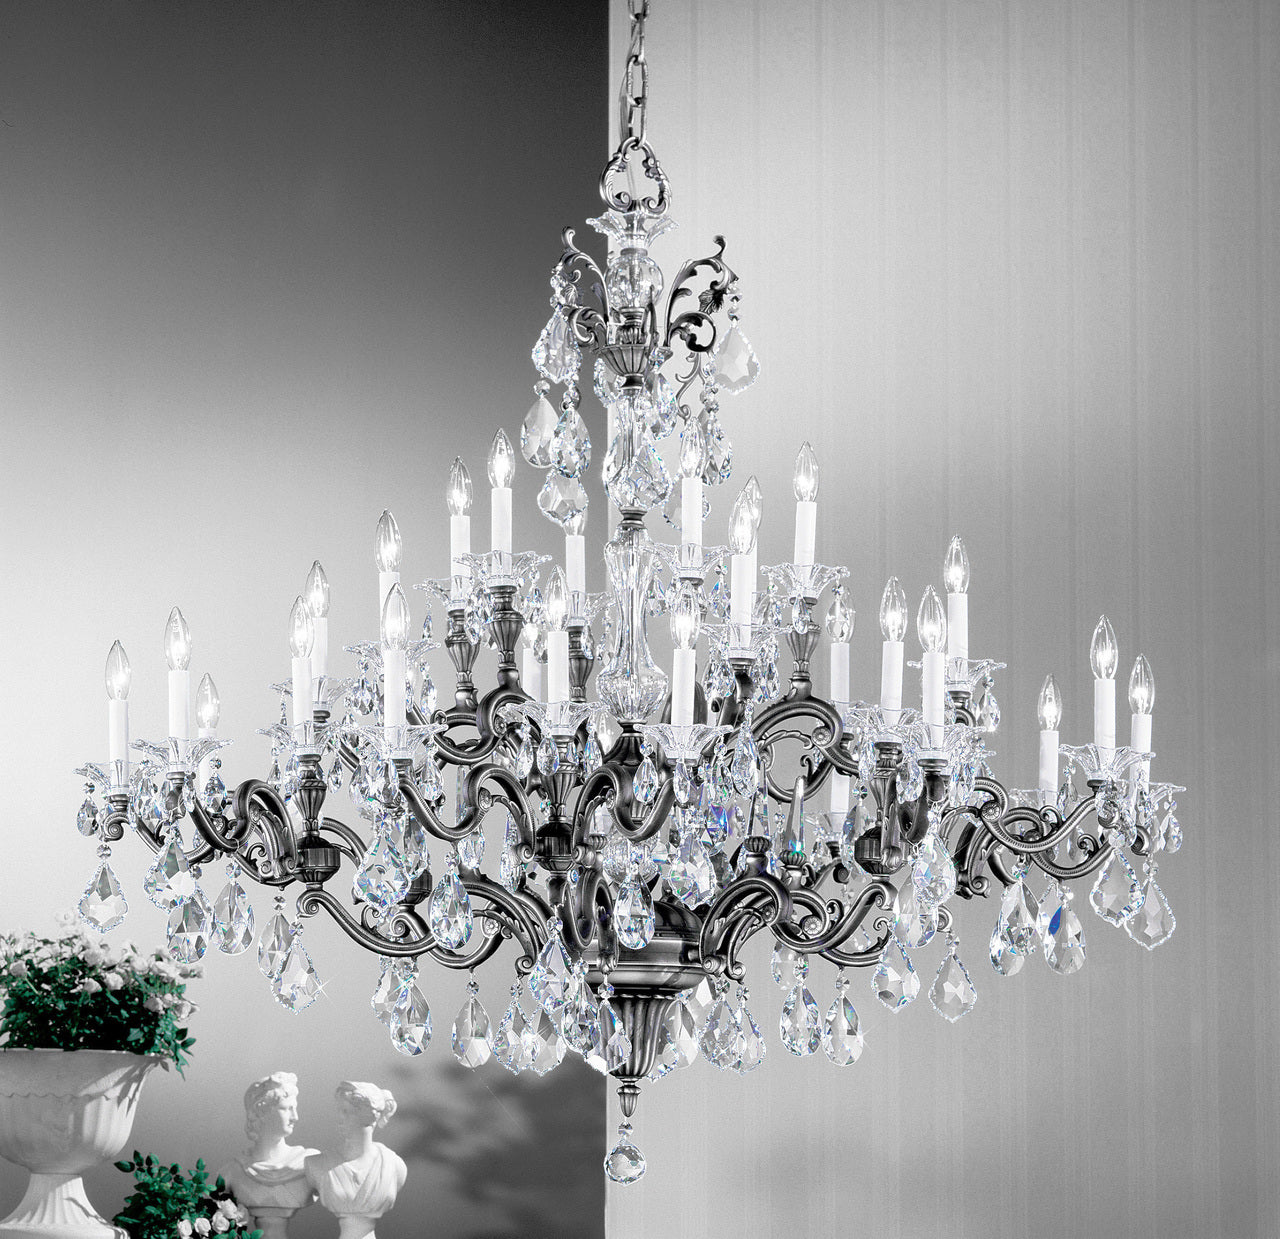 Classic Lighting 57130 MS CSA Via Firenze Crystal Chandelier in Millennium Silver (Imported from Spain)